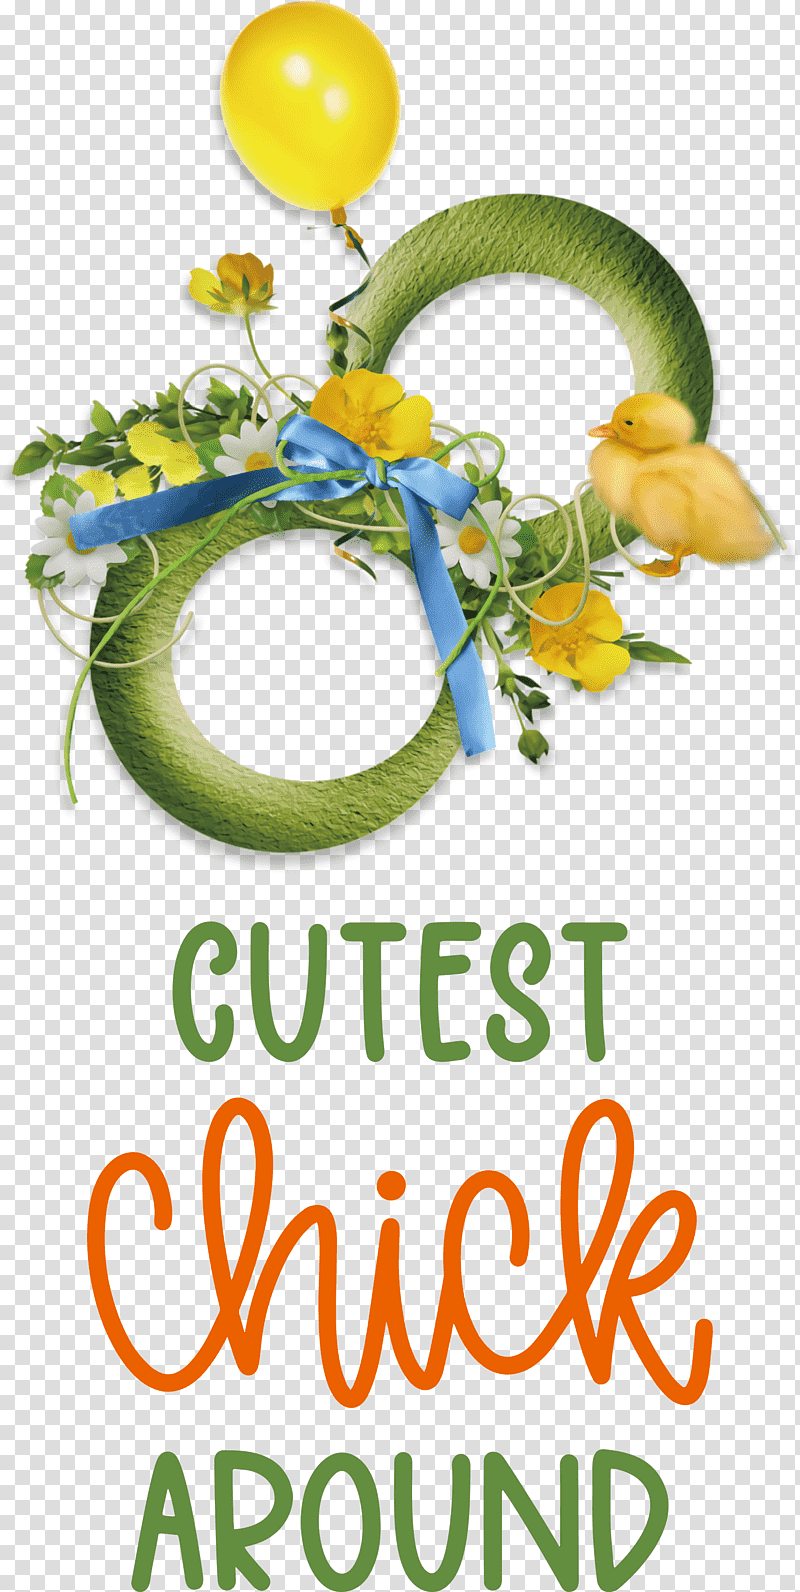 Happy Easter Easter Day Cutest Chick Around, Cut Flowers, Floral Design, Meter, Fruit transparent background PNG clipart